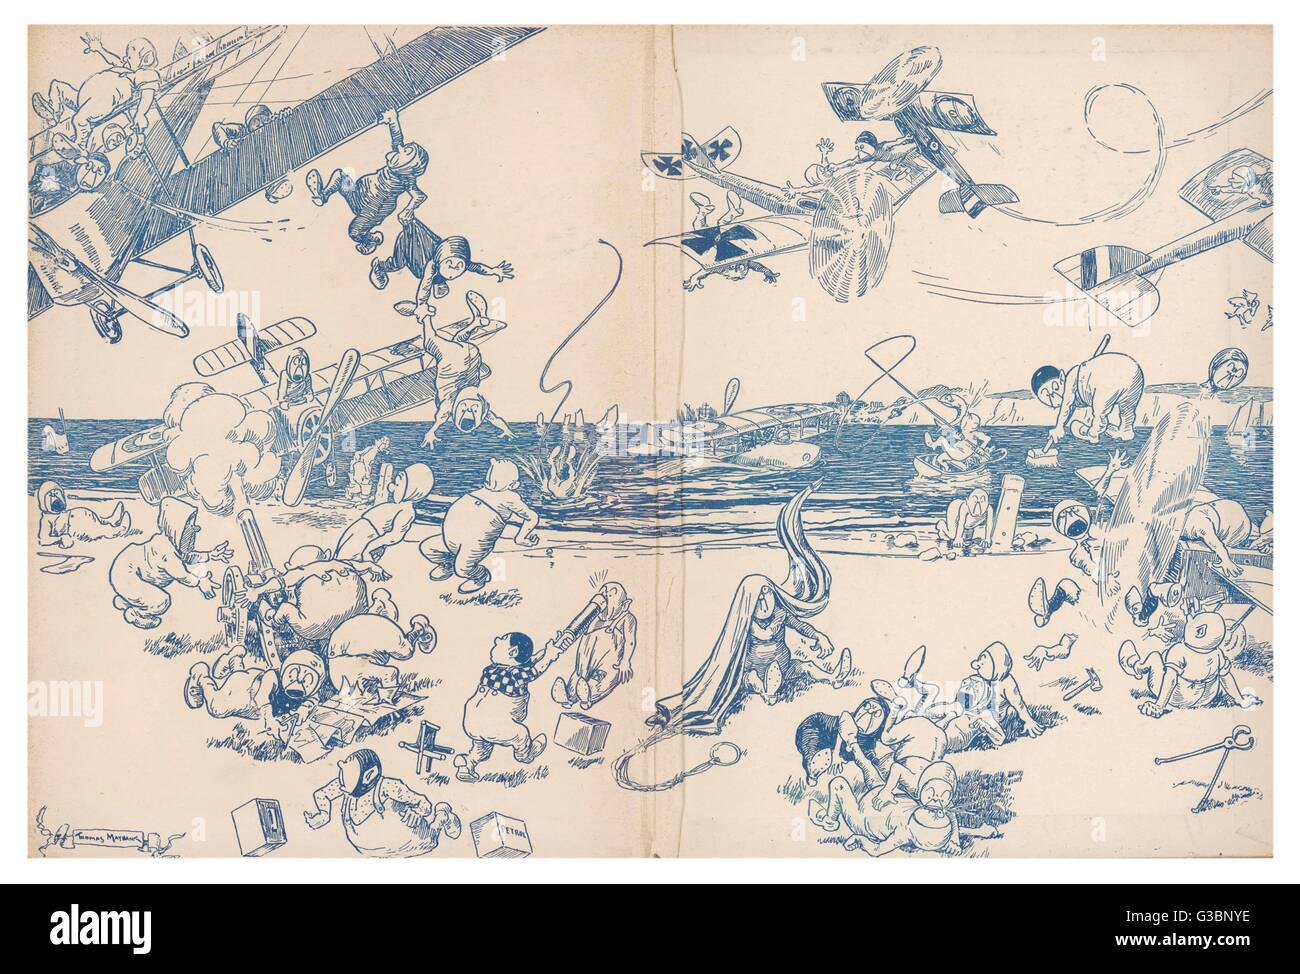 Illustration 2/2  A comical cartoon showing  elves or possibly pixies  getting into mischief with  various aircraft      Date: circa. 1918 Stock Photo